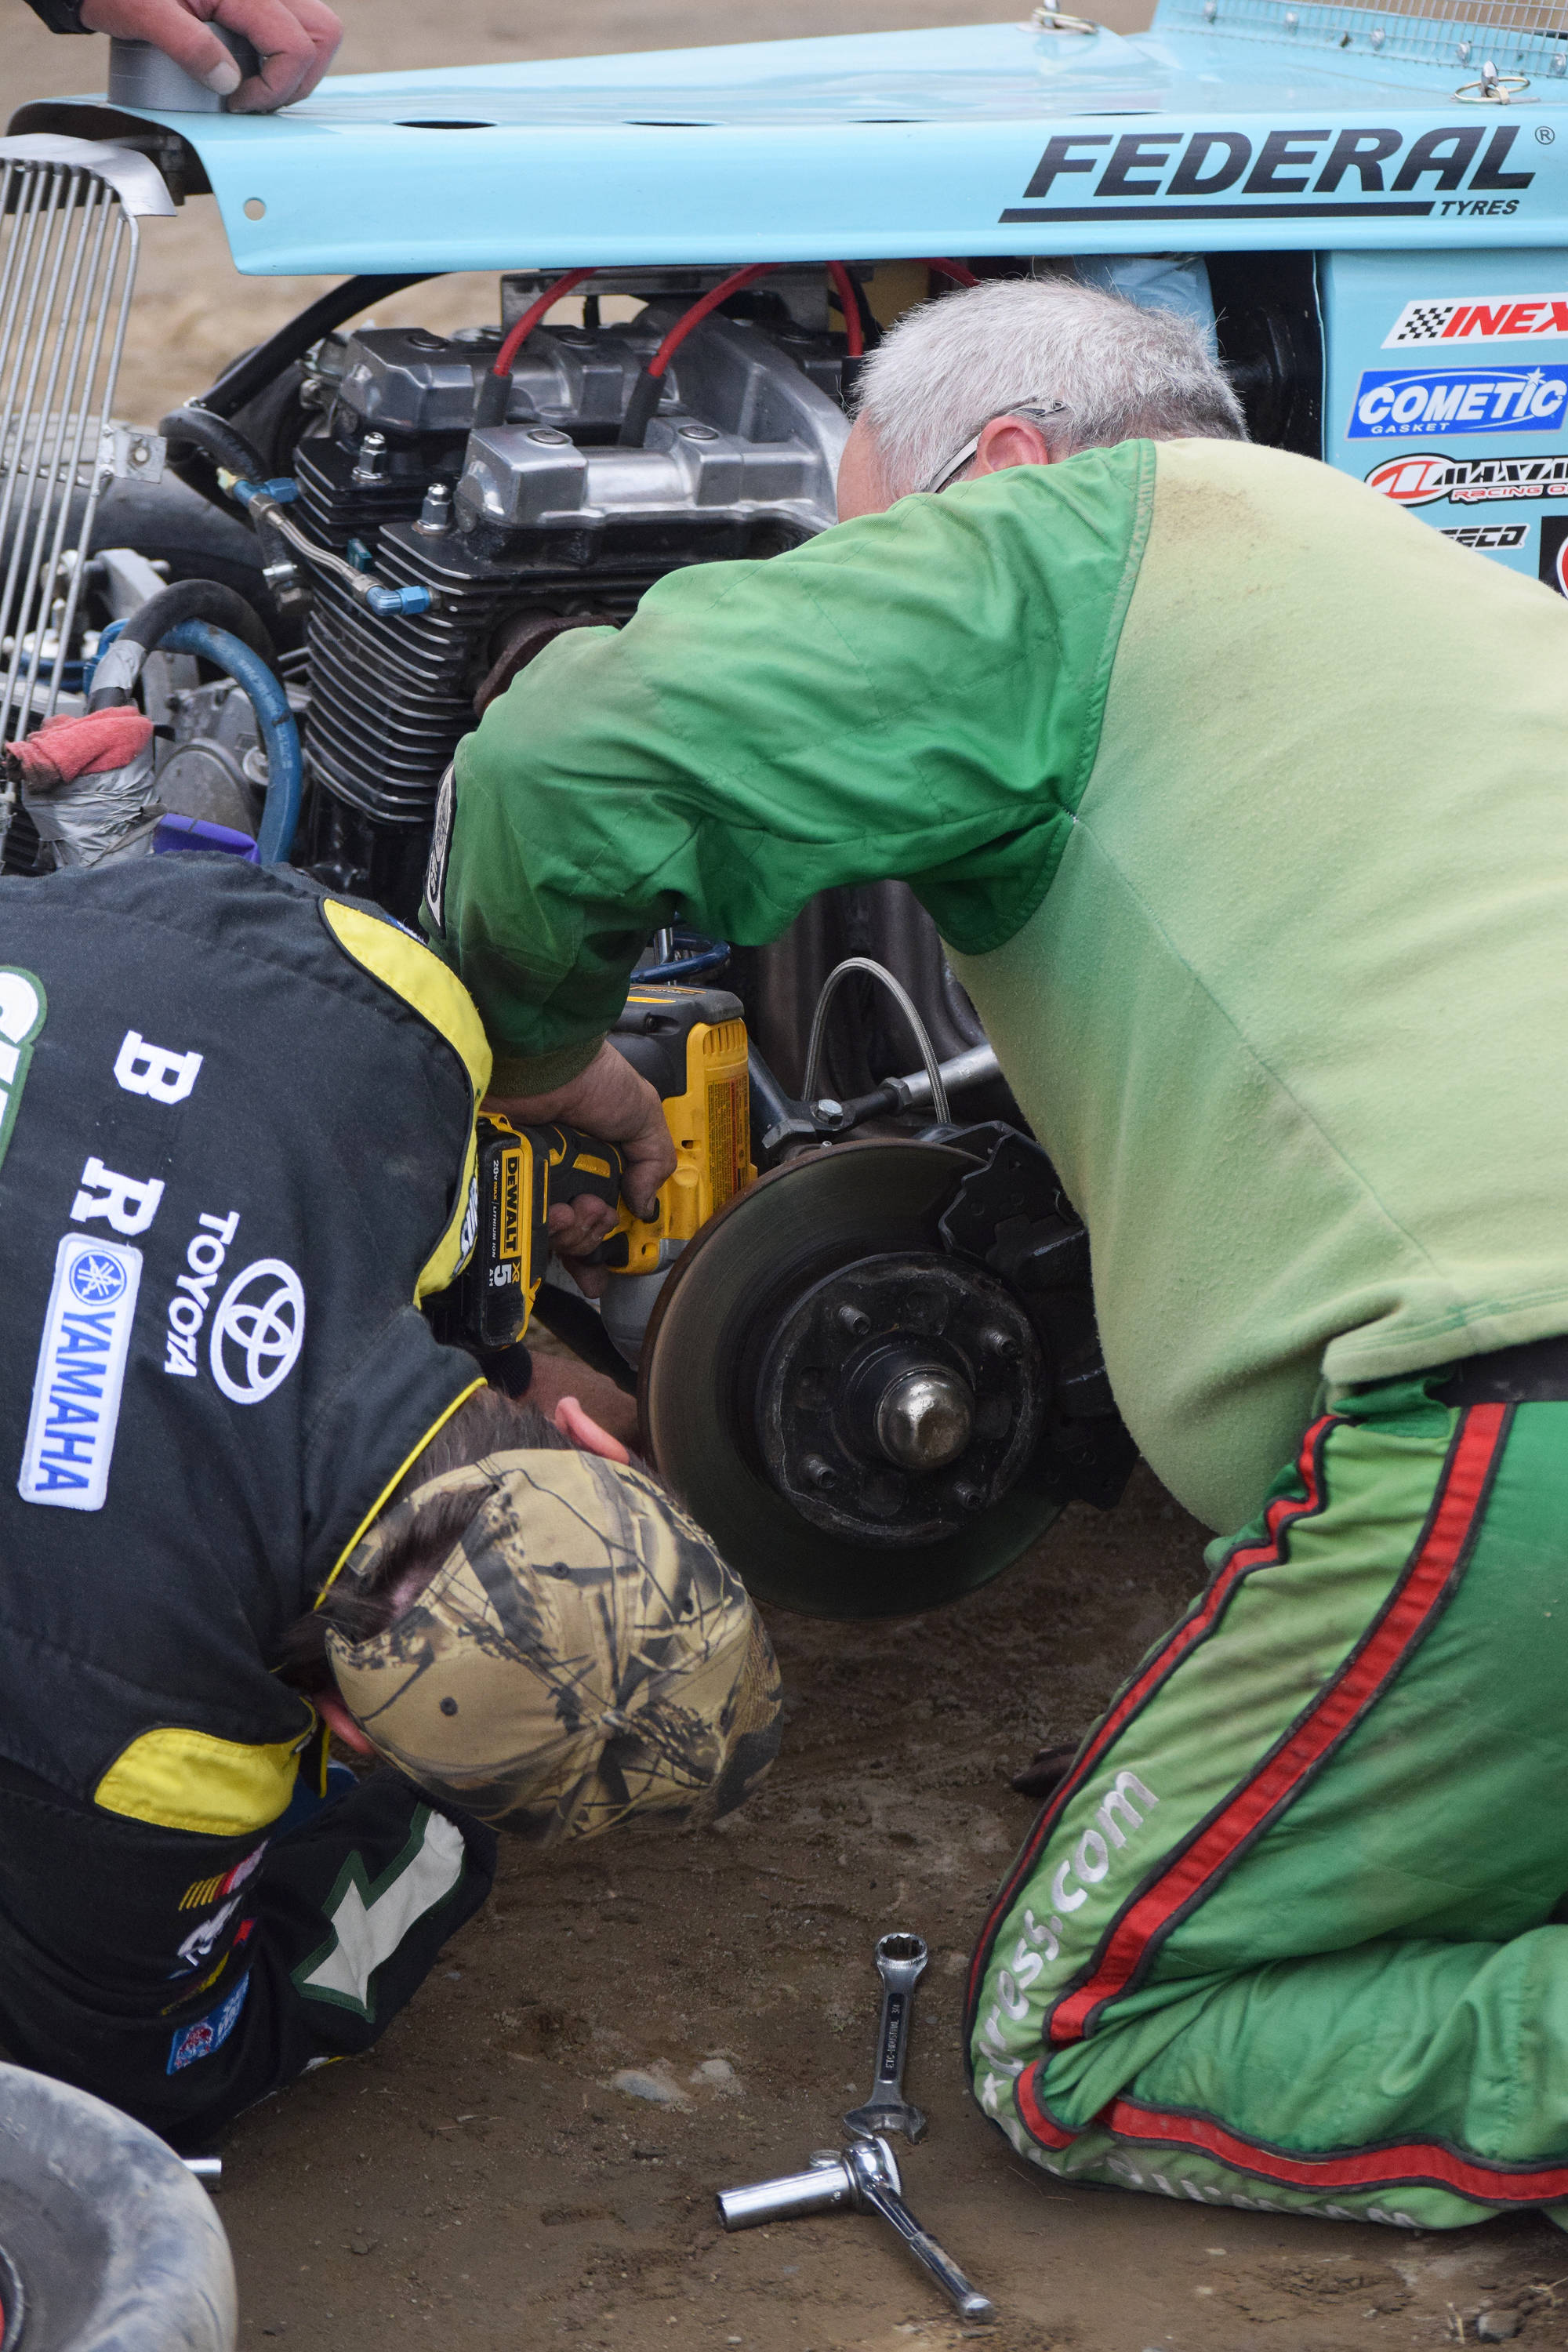 Ty Torkelson (right) makes repairs to his No. 44 Legends car with a teammate Saturday night at Twin City Raceway in Kenai. (Photo by Joey Klecka/Peninsula Clarion)